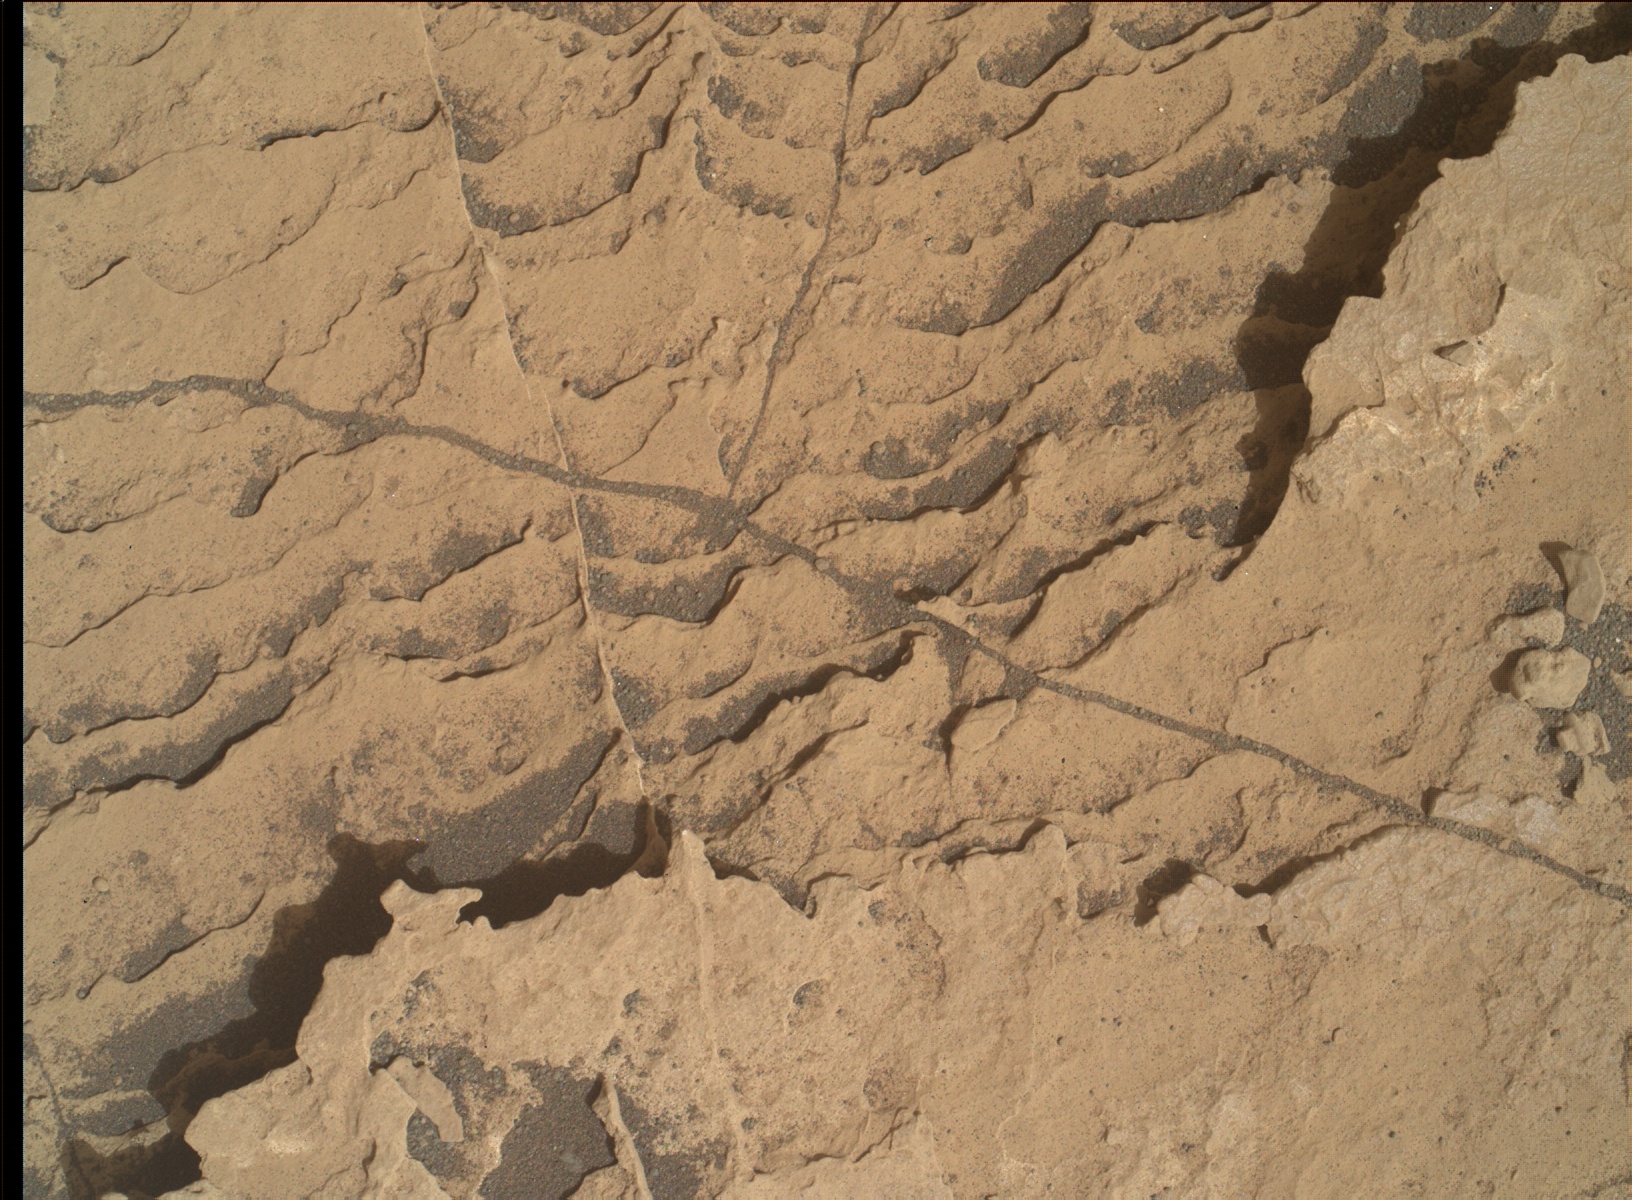 Nasa's Mars rover Curiosity acquired this image using its Mars Hand Lens Imager (MAHLI) on Sol 1691